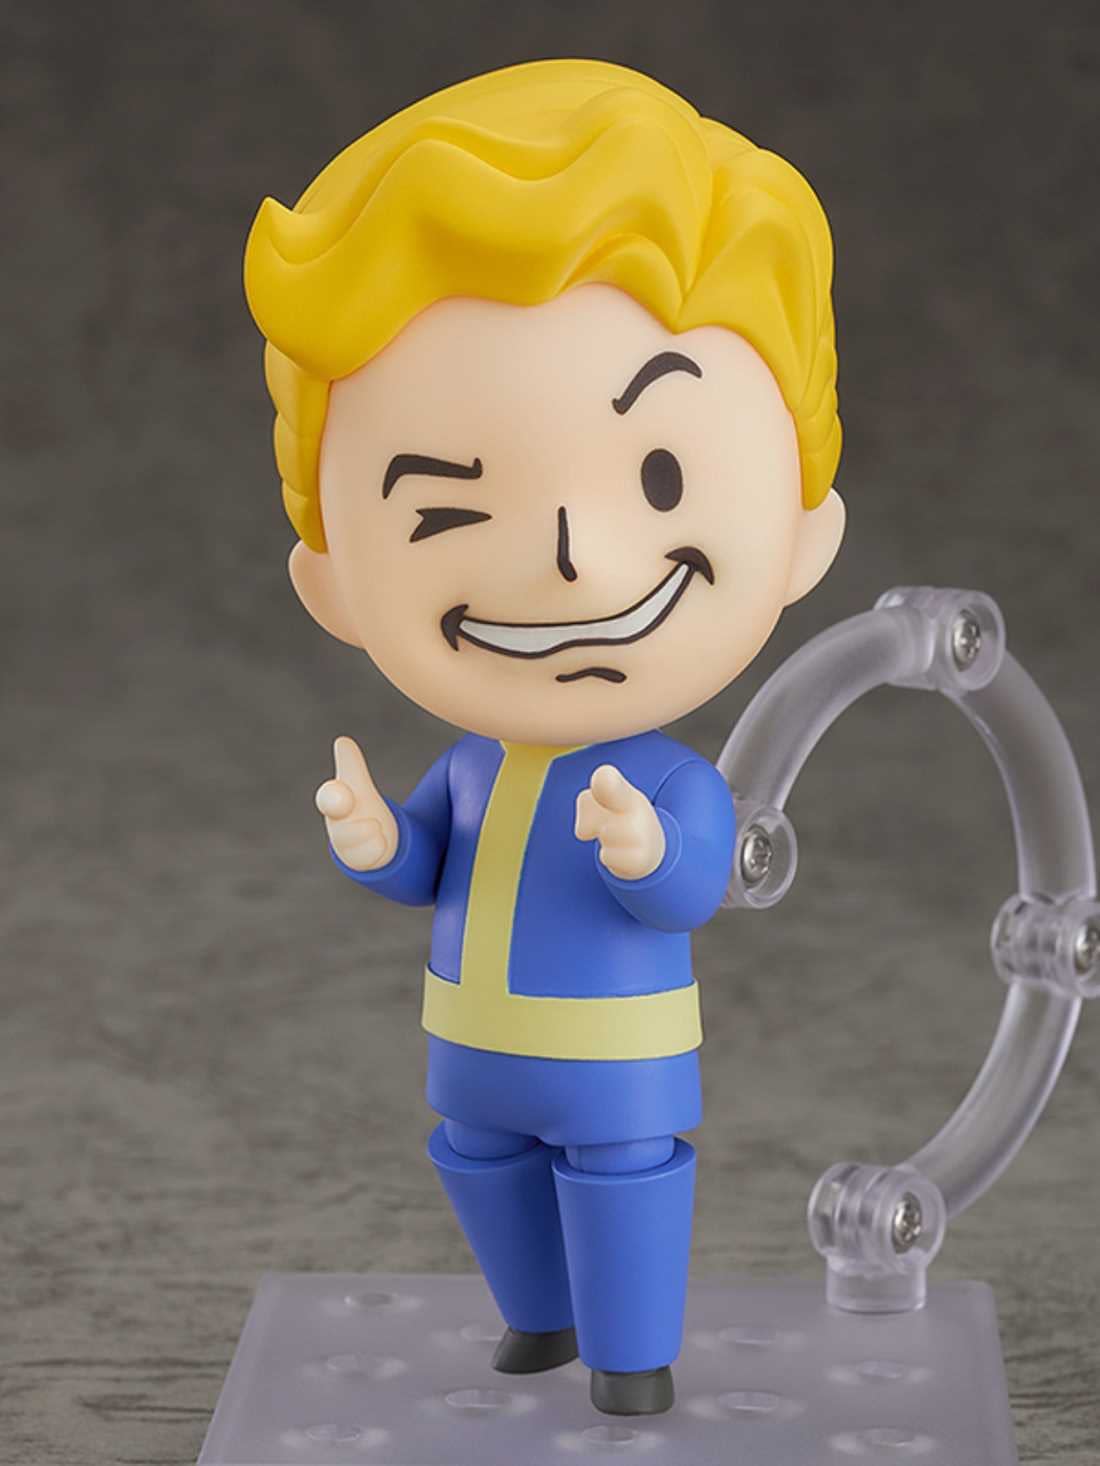 Leave the Vault with New Vault Boy Nendoroid from Good Smile Company